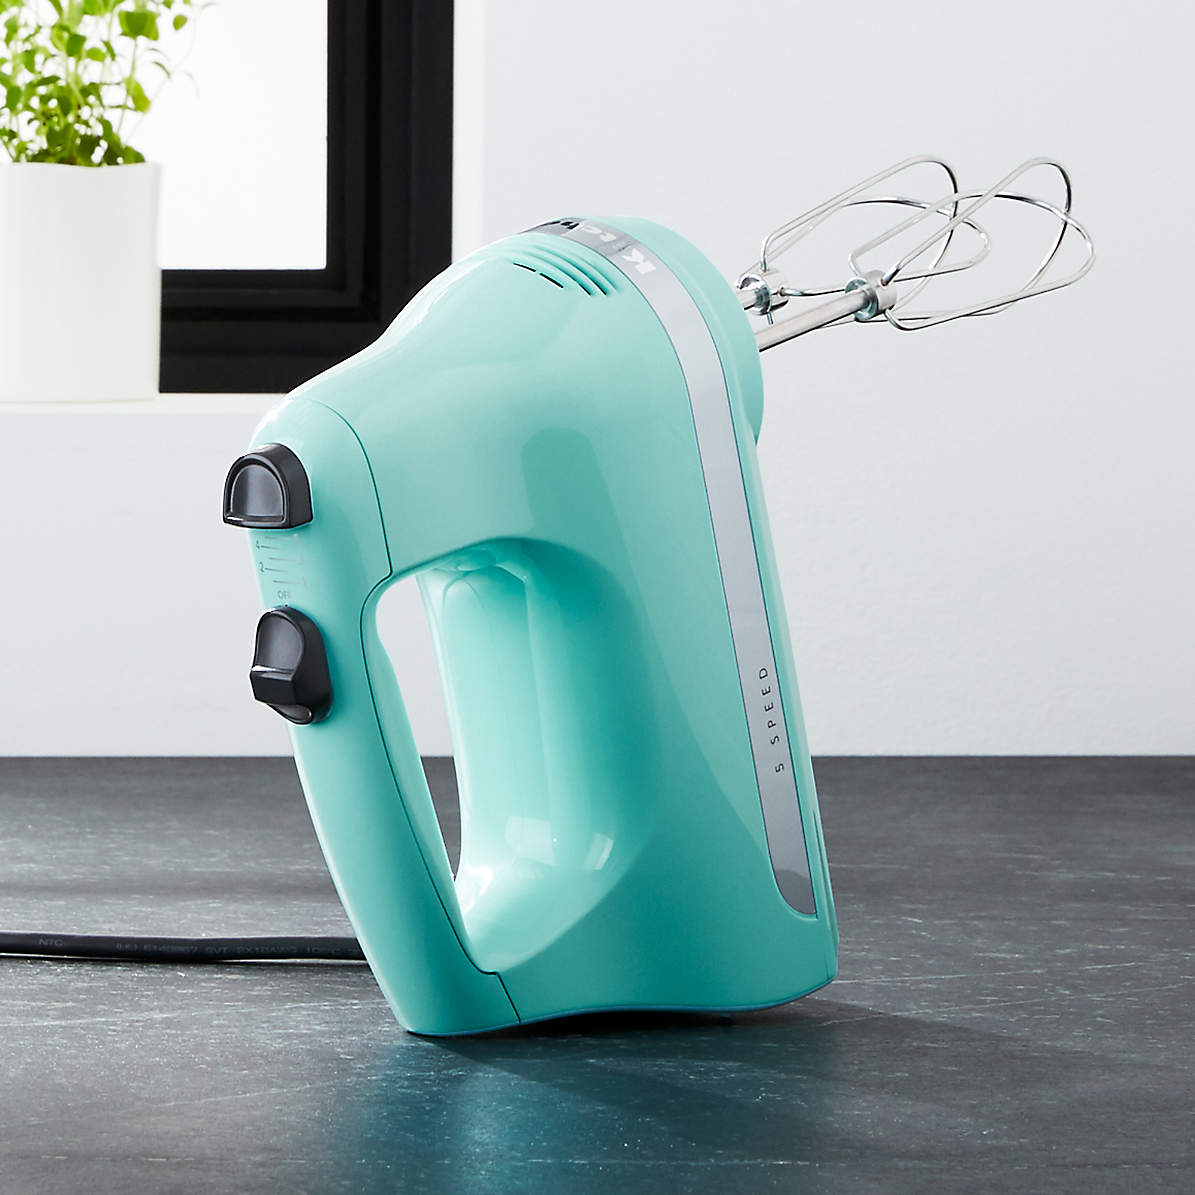 Ice Blue Details about   KitchenAid KHM512IC 5-Speed Ultra Power Hand Mixer 